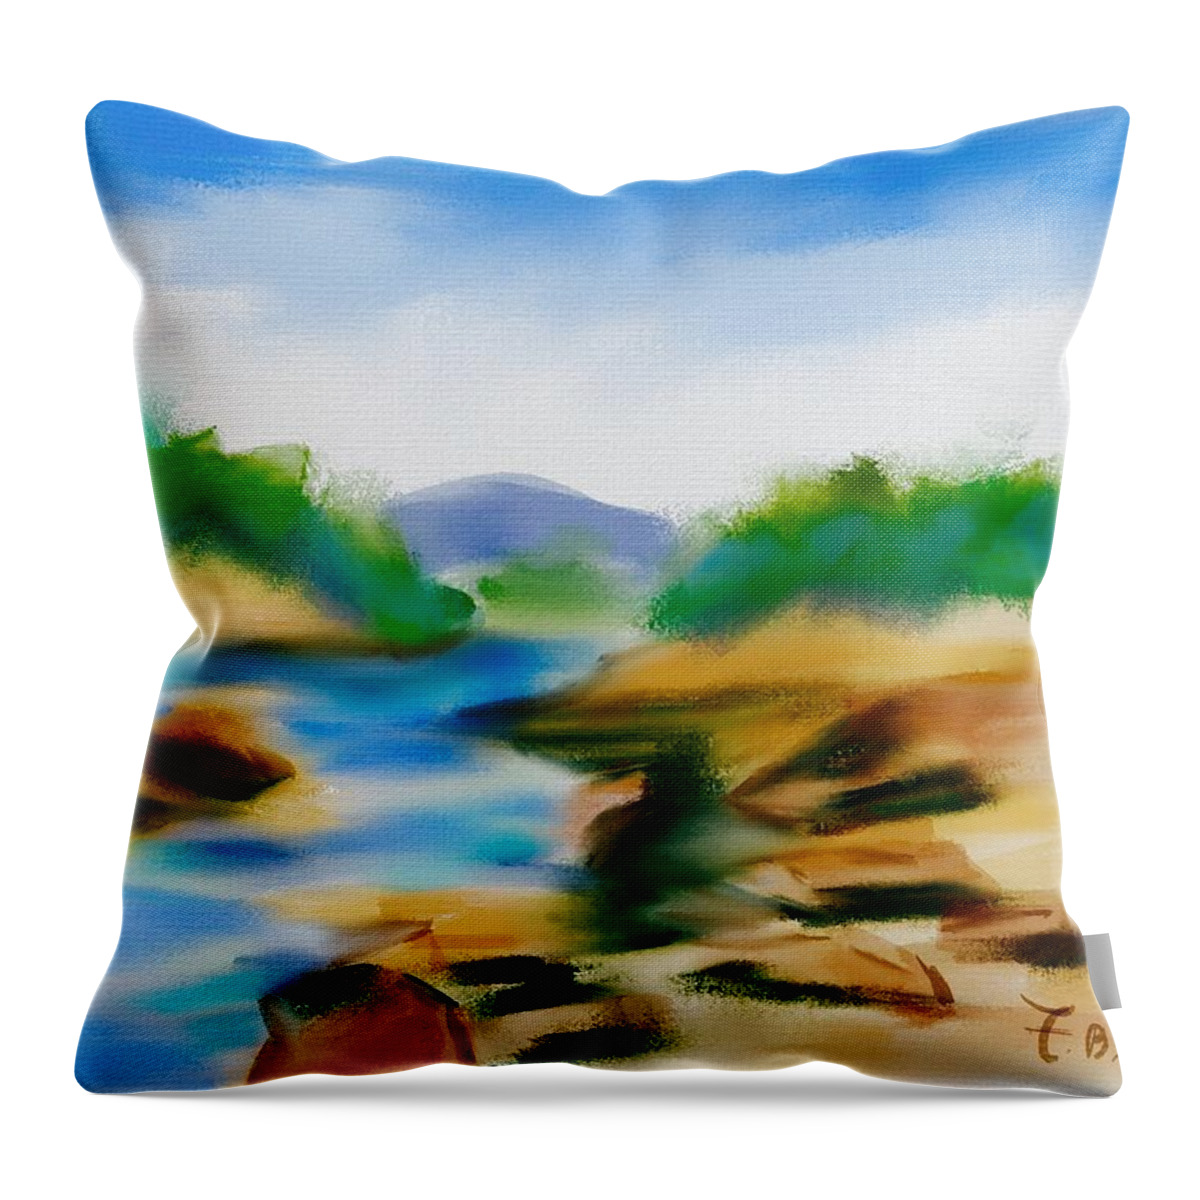 Ipad Art Throw Pillow featuring the digital art Waterfall In Keene NY by Frank Bright